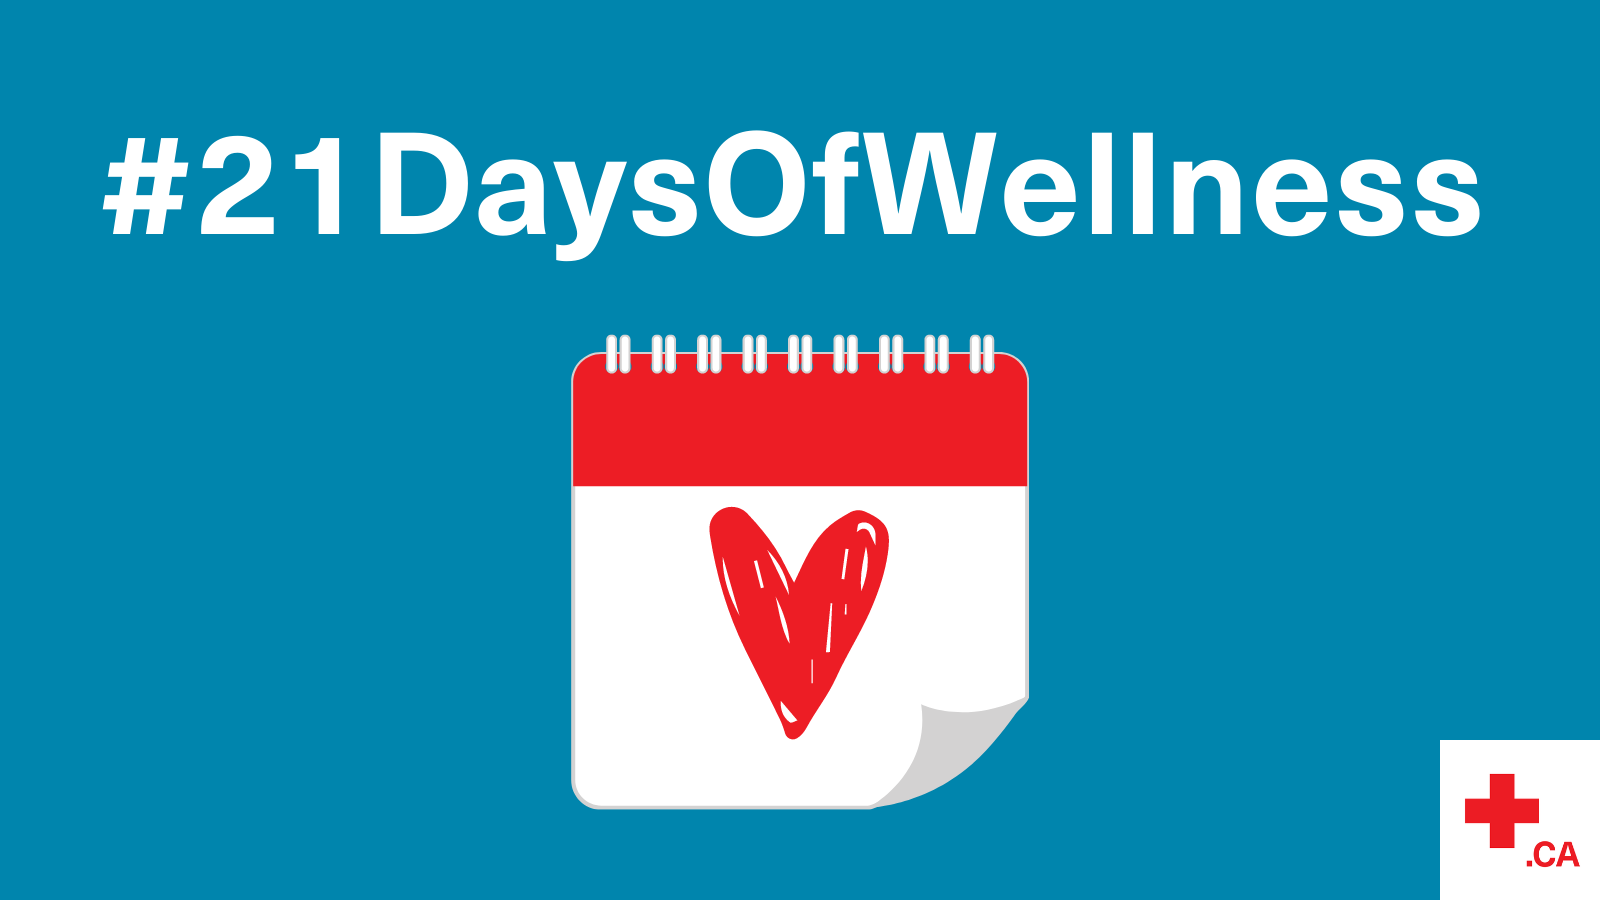 21 days of wellness challenge - Canadian Red Cross Blog